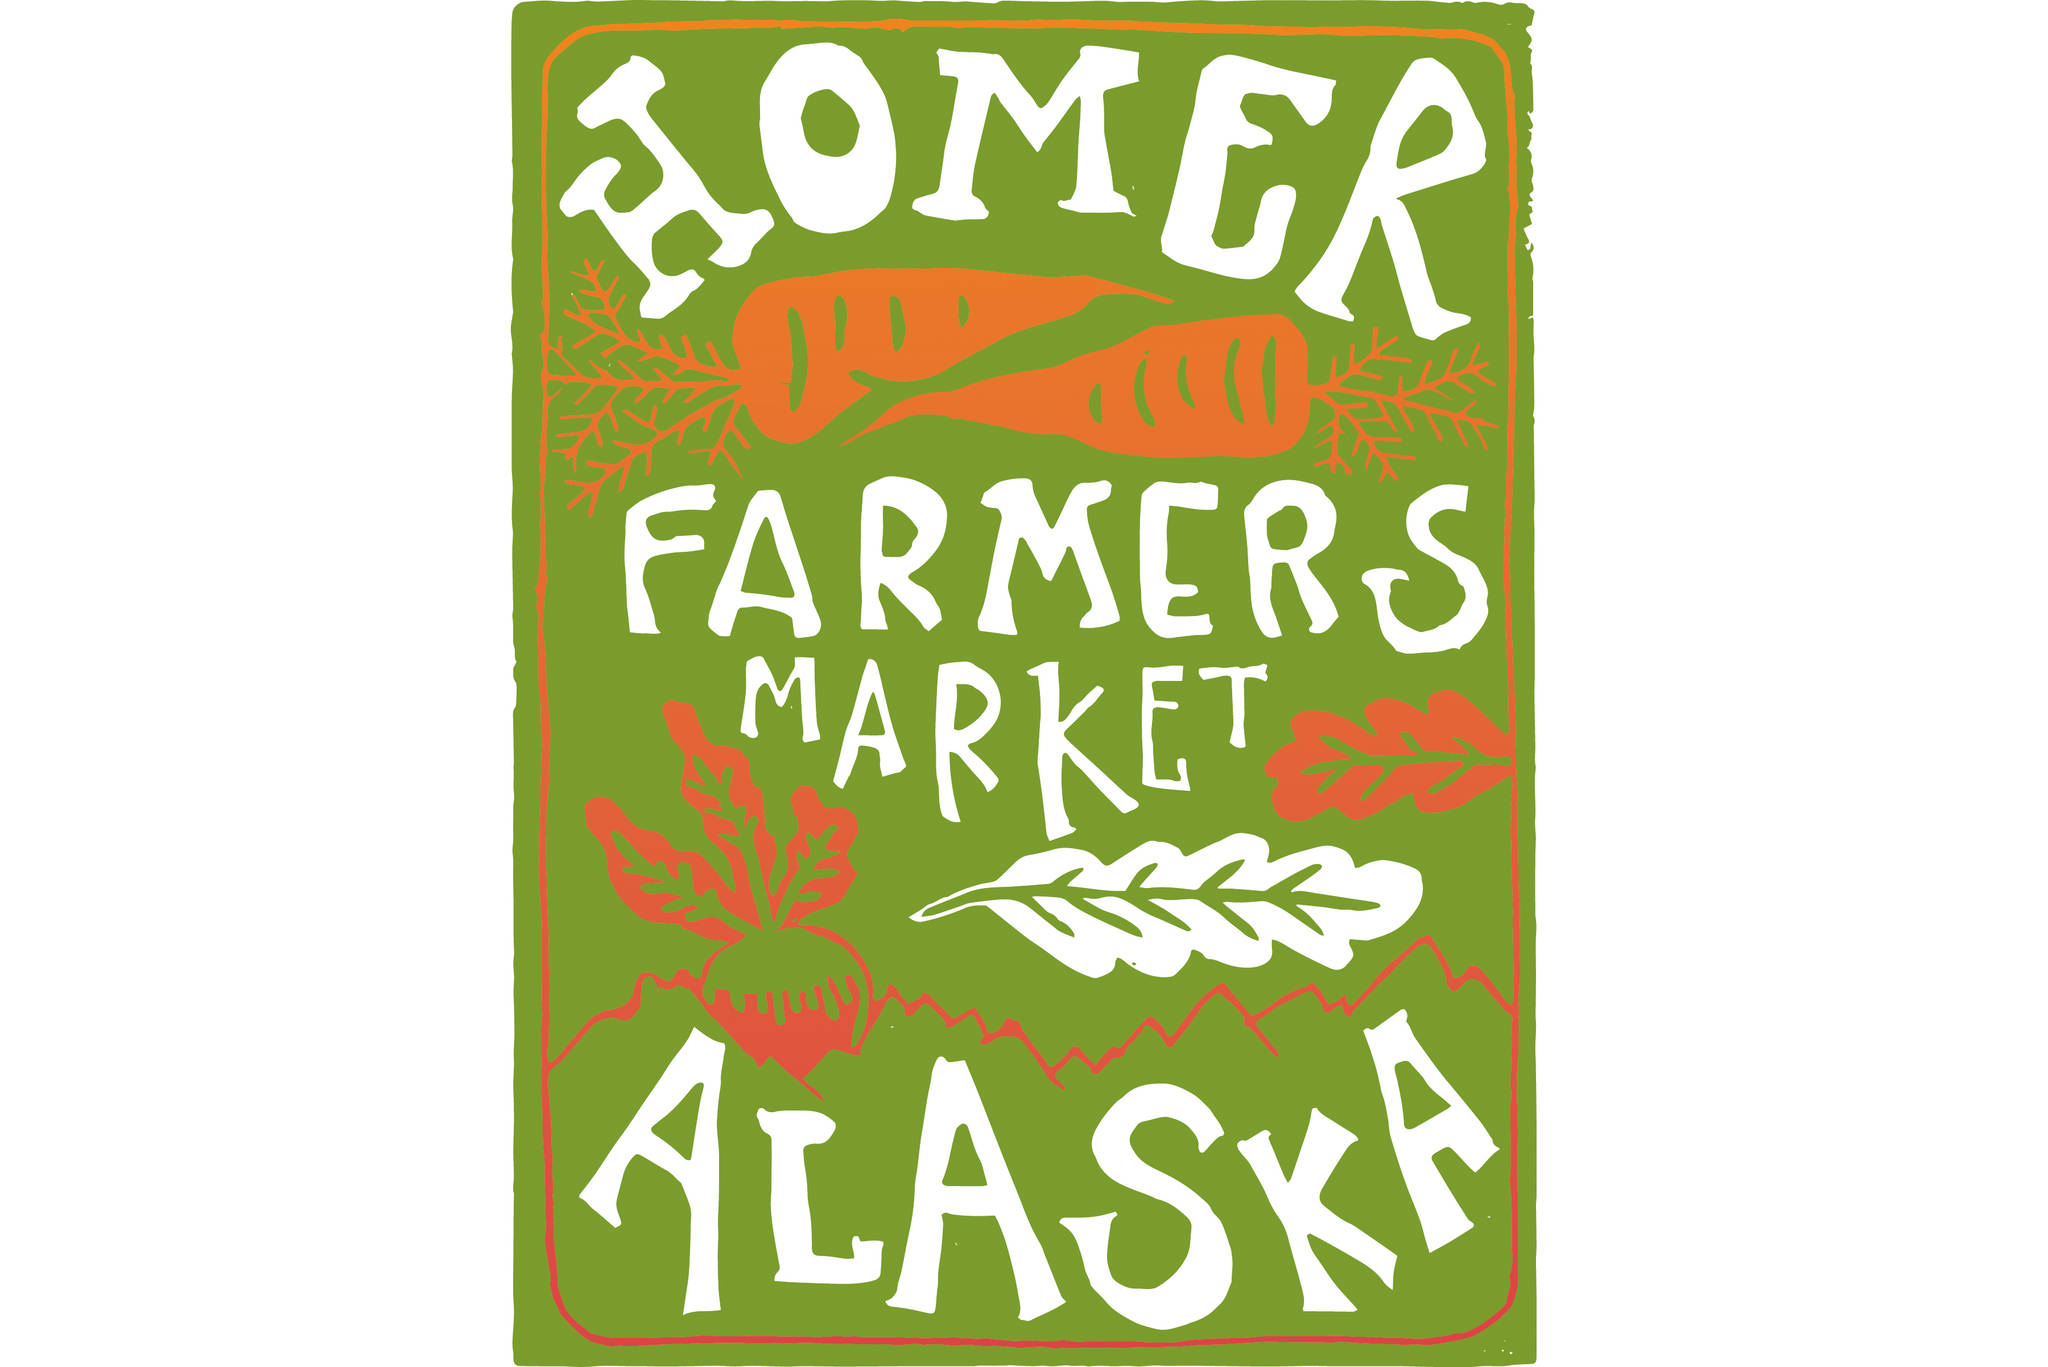 Homer Farmers Market: Support local agriculture by supporting farmers markets